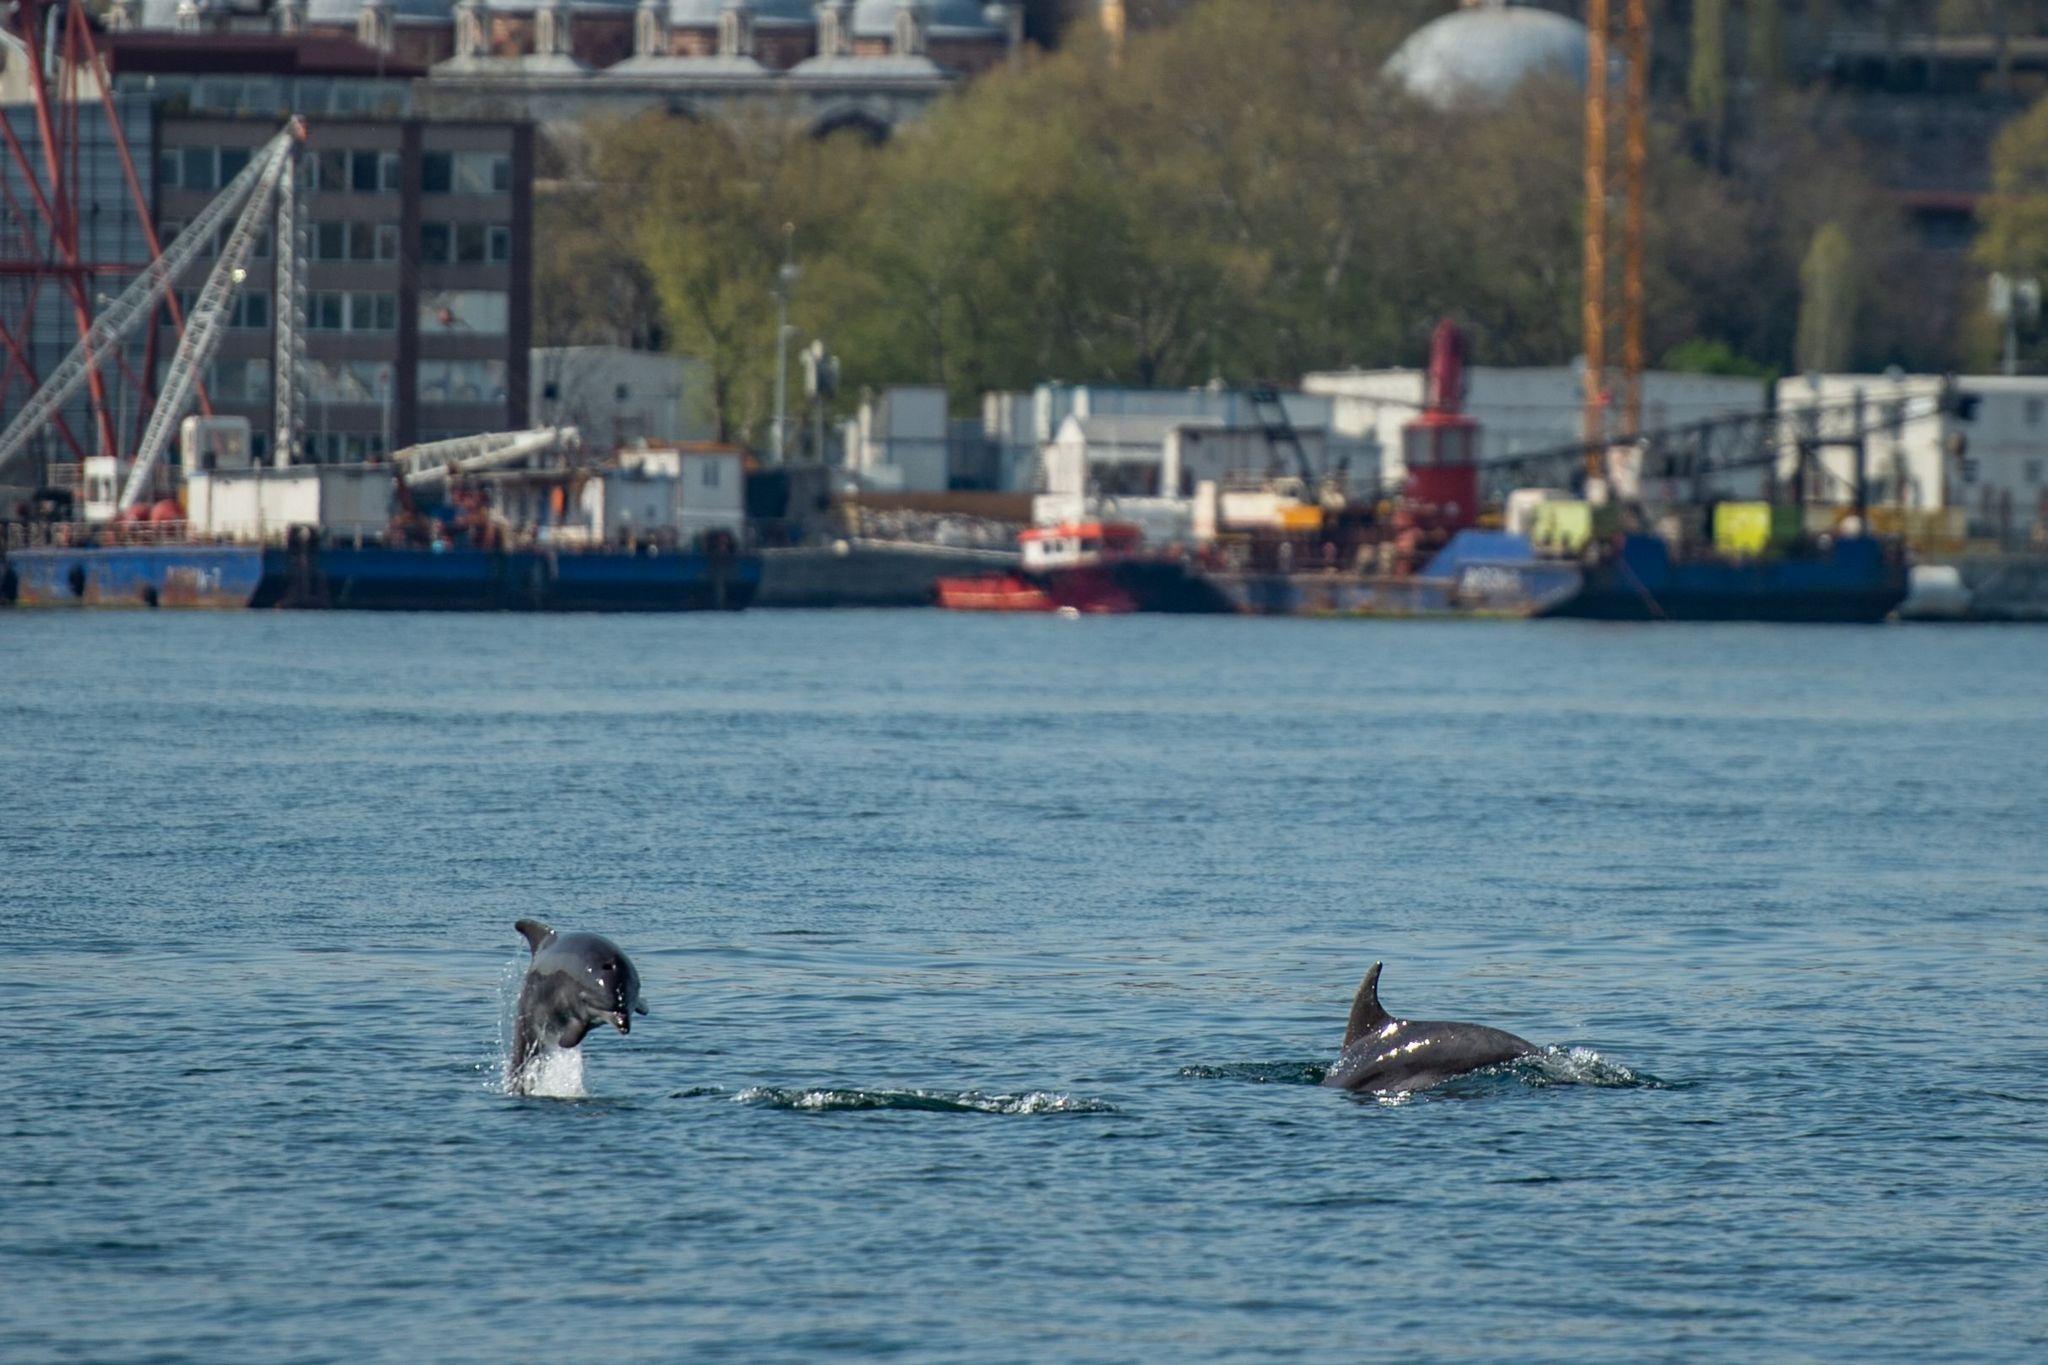 Residents of Istanbul say dolphins are coming further up the Bosphorus than usual